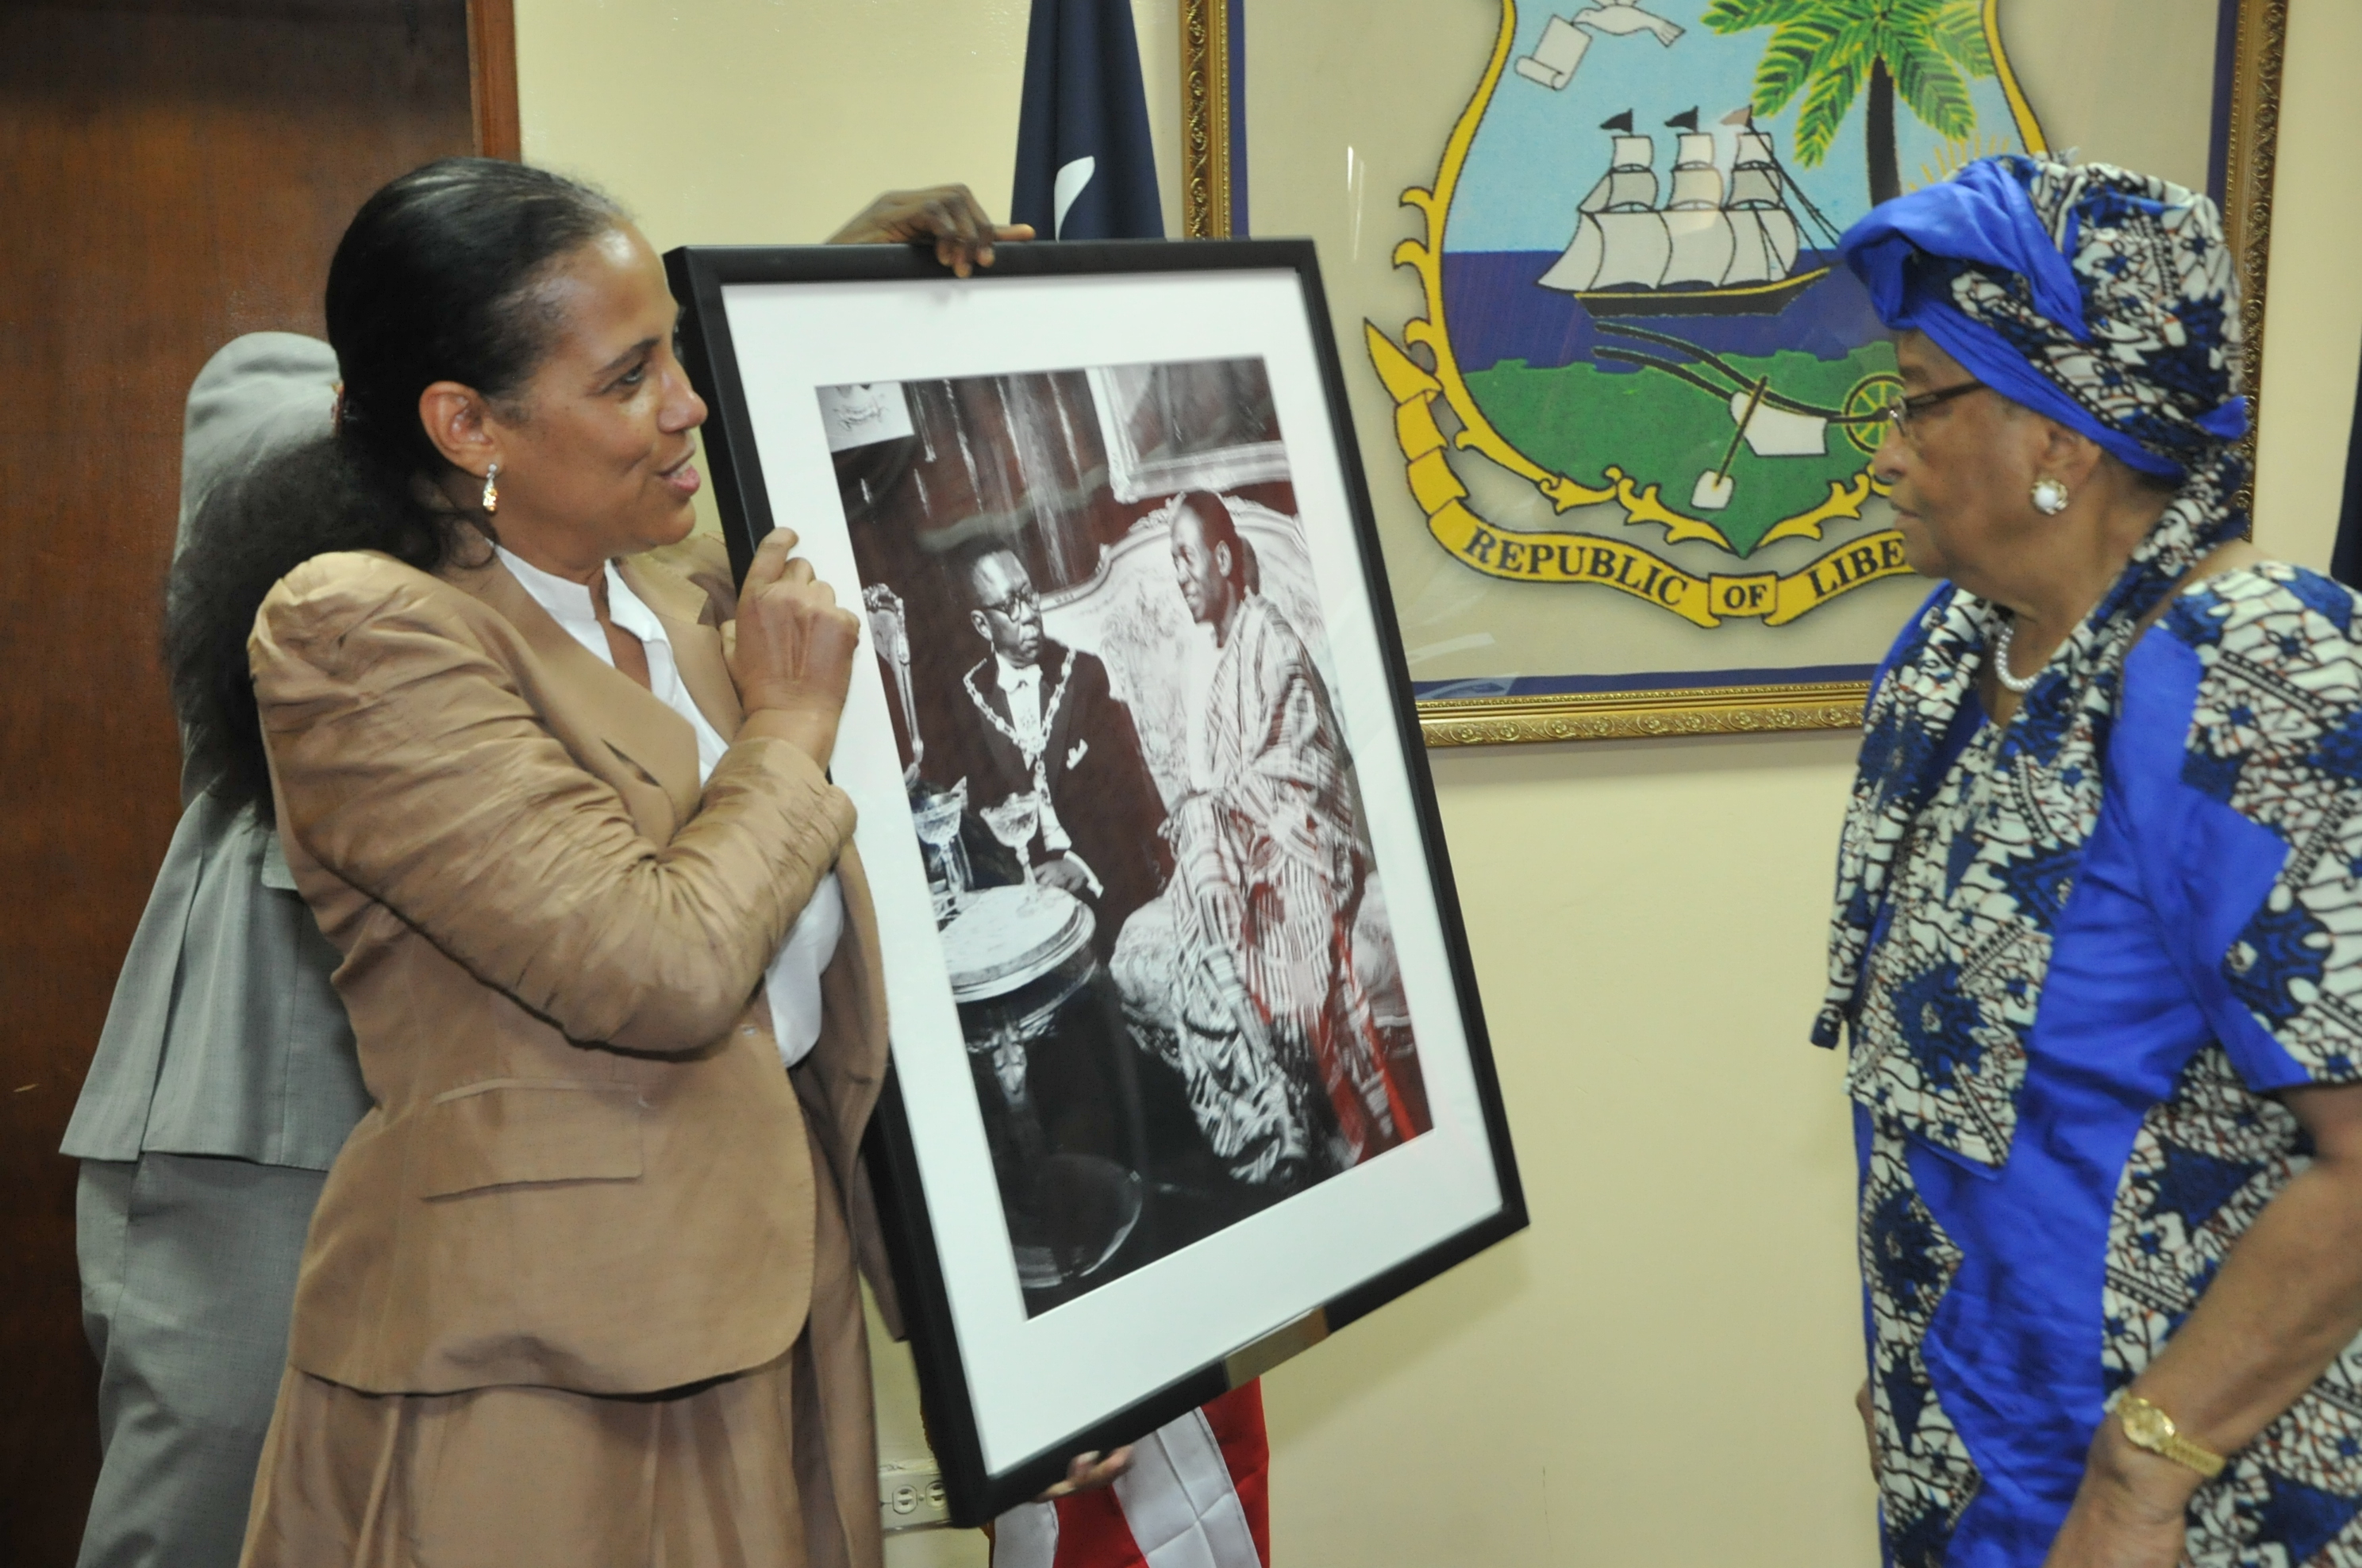  Presentation to President Ellen Johnson Sirleaf of official photograph of Liberia's President William V. S. Tubman and Kwame Nkrumah of The Gold Coast taken by Griff Davis in January 1953.